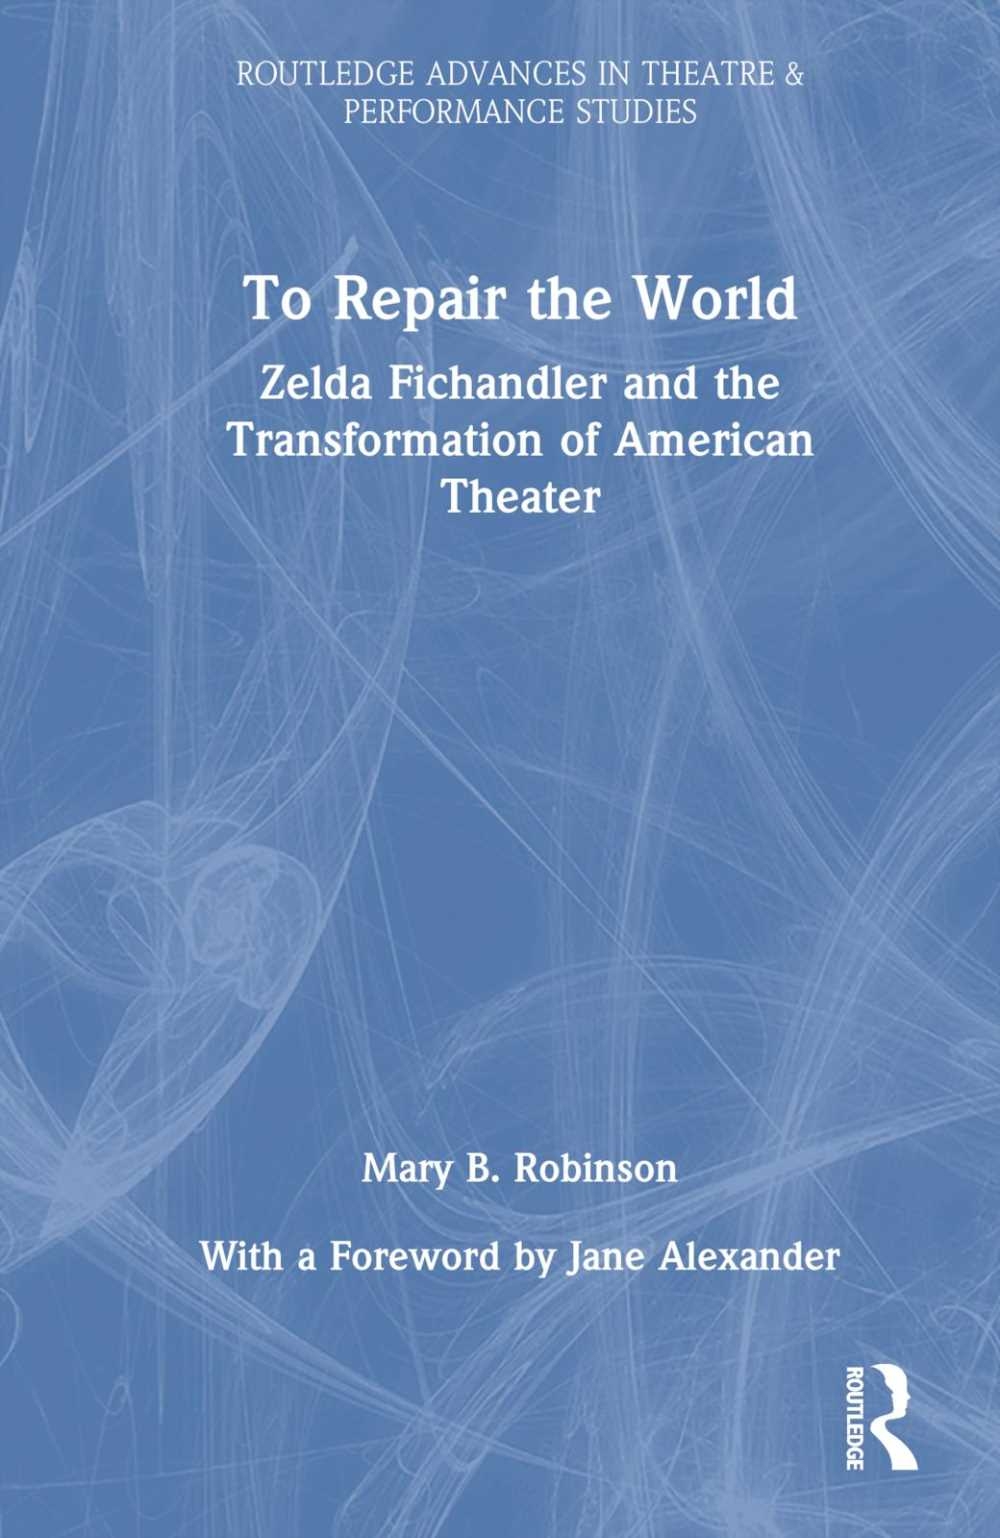 To Repair the World: Zelda Fichandler and the Transformation of American Theater